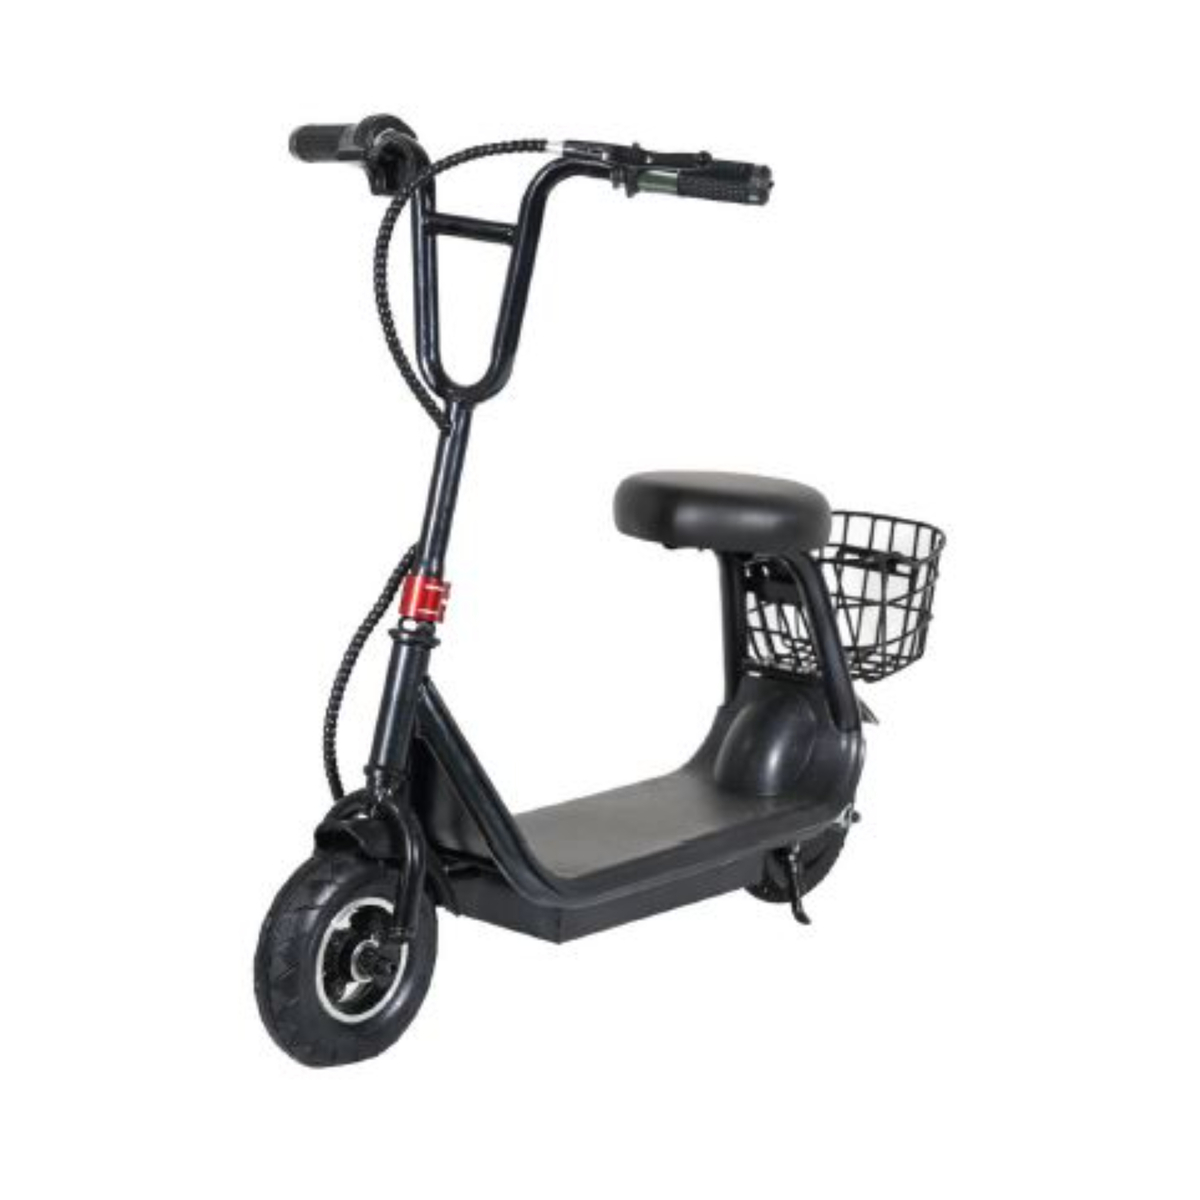 Fanar 250 W 24v Electric Scooter 4 4a Lithium Battery Black M8 Online At Best Price E Bikes